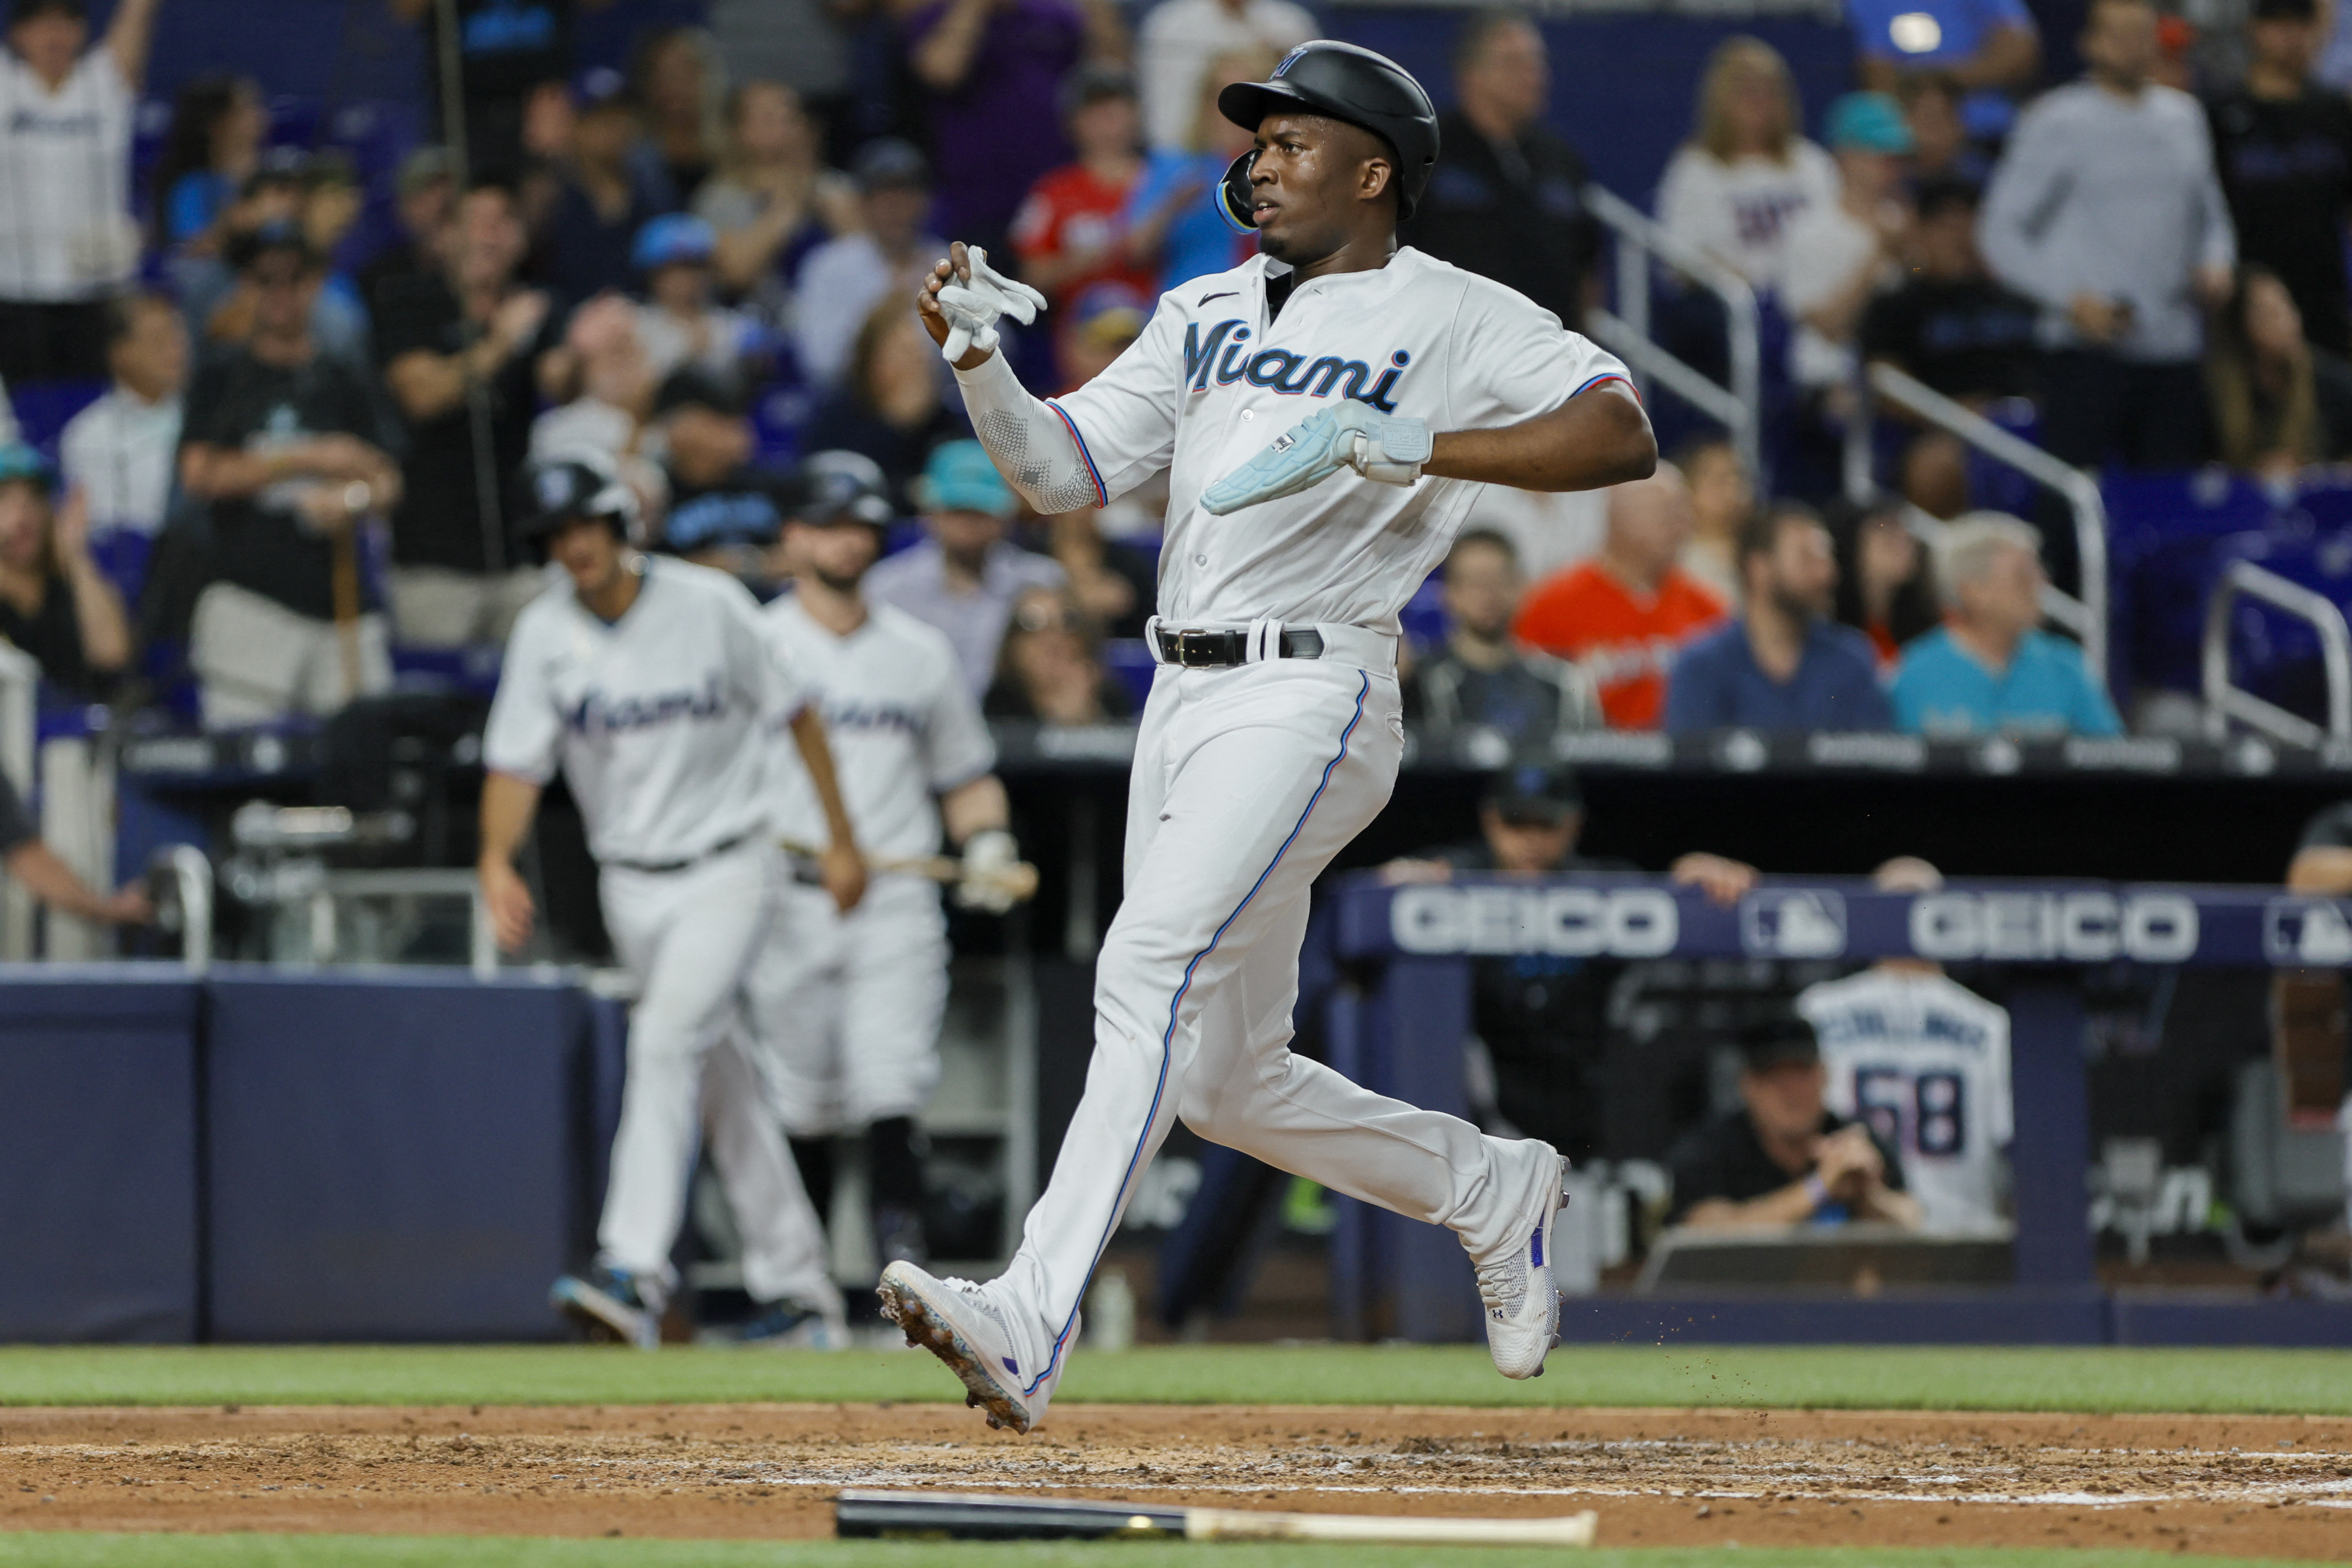 MLB capsules: Arraez goes 5 for 5 to lift batting average to .400 as  Marlins blank Jays 11-0